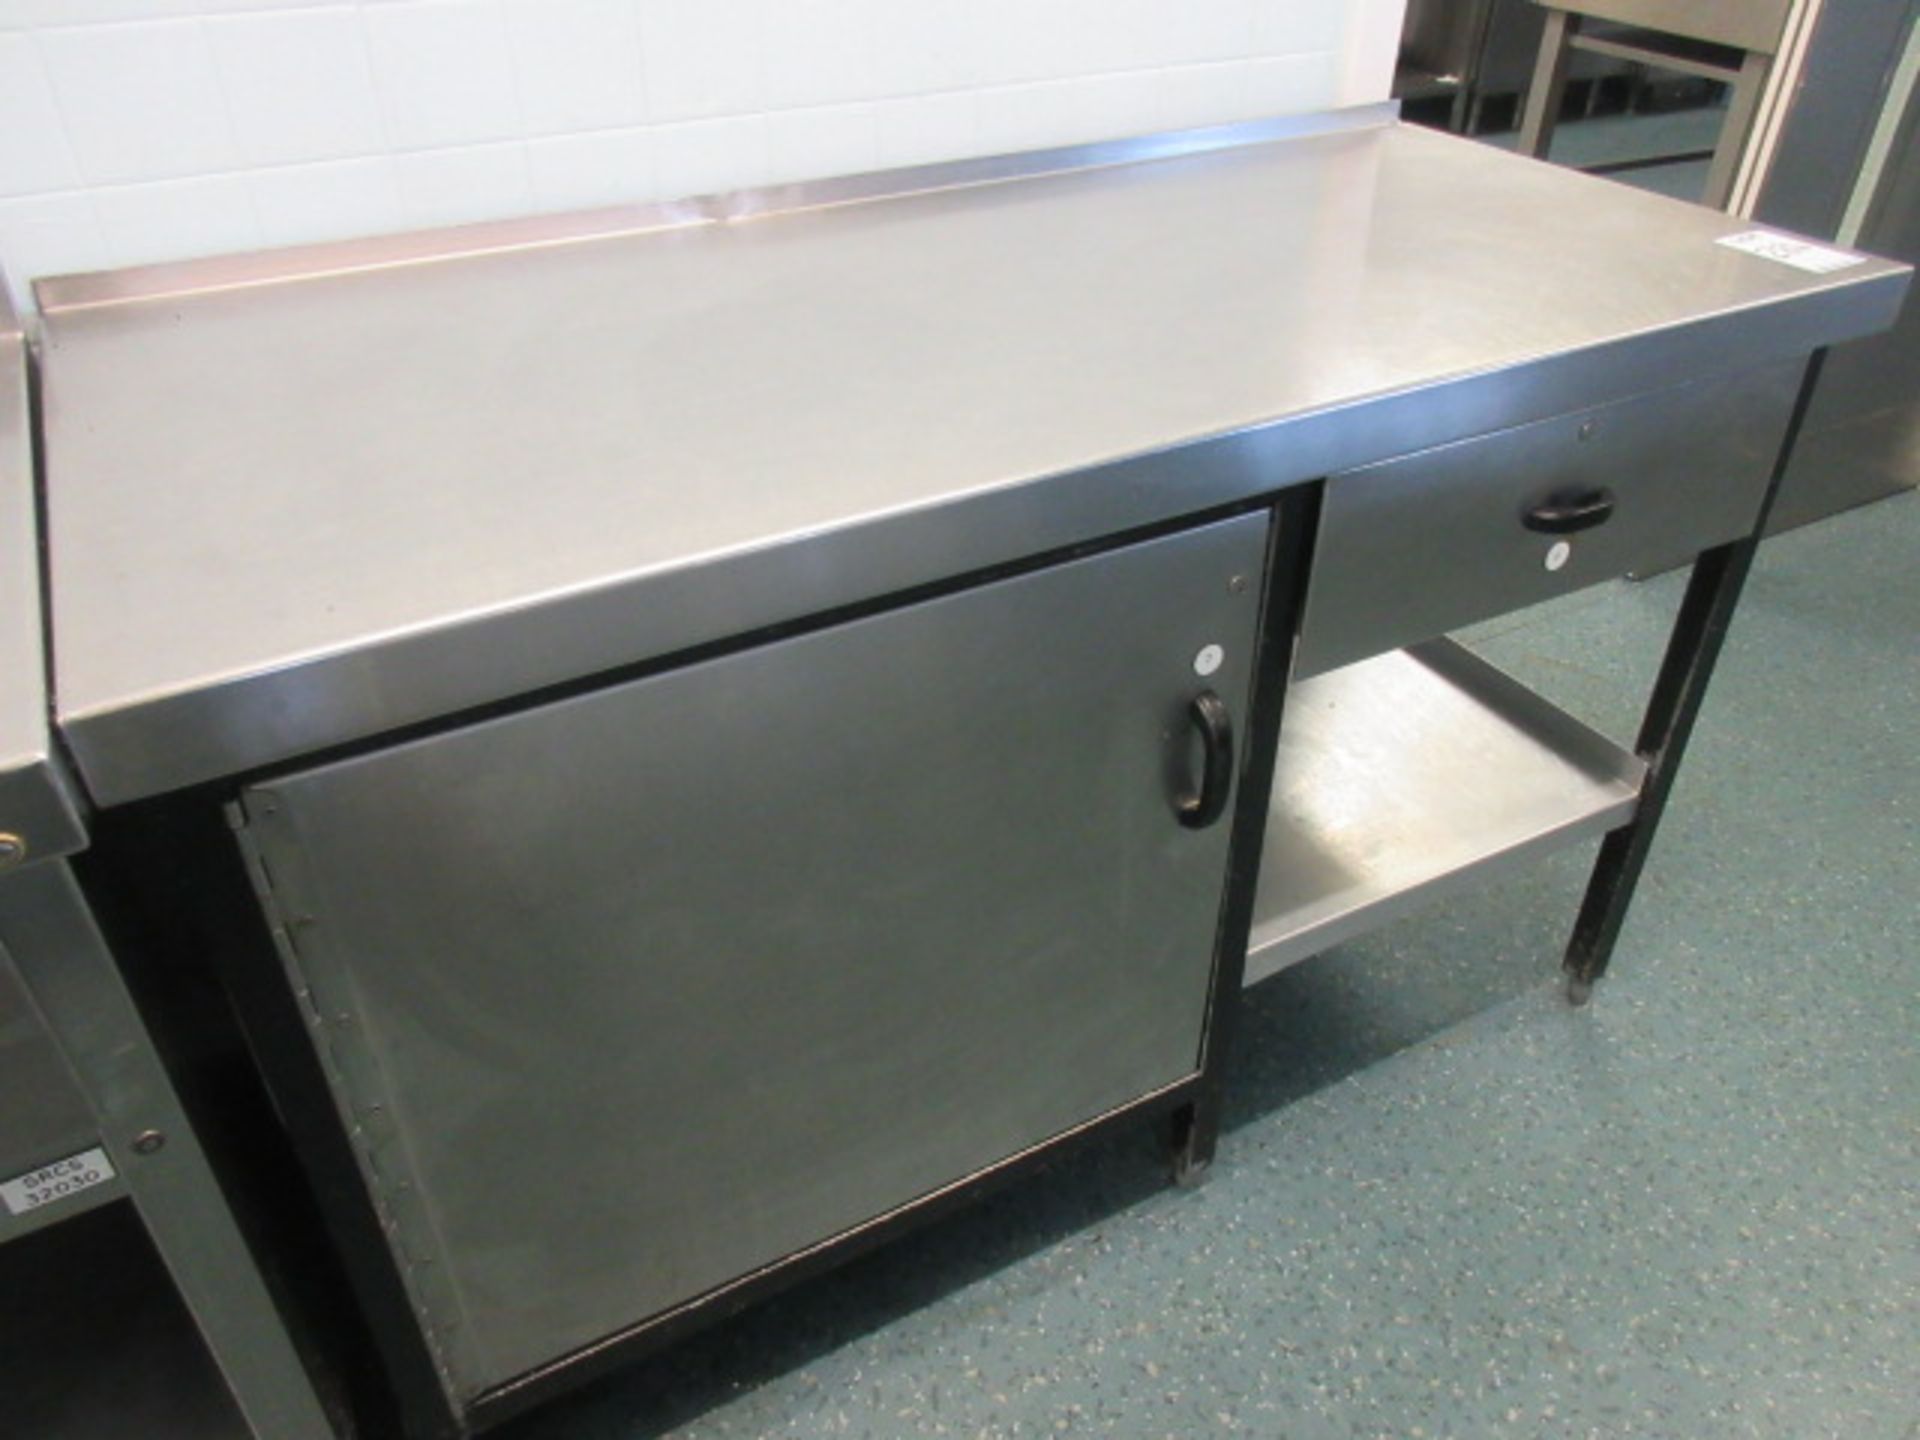 STAINLESS STEEL STORAGE COUNTER/WORKTOP 1400 mm LONG X 600 mm